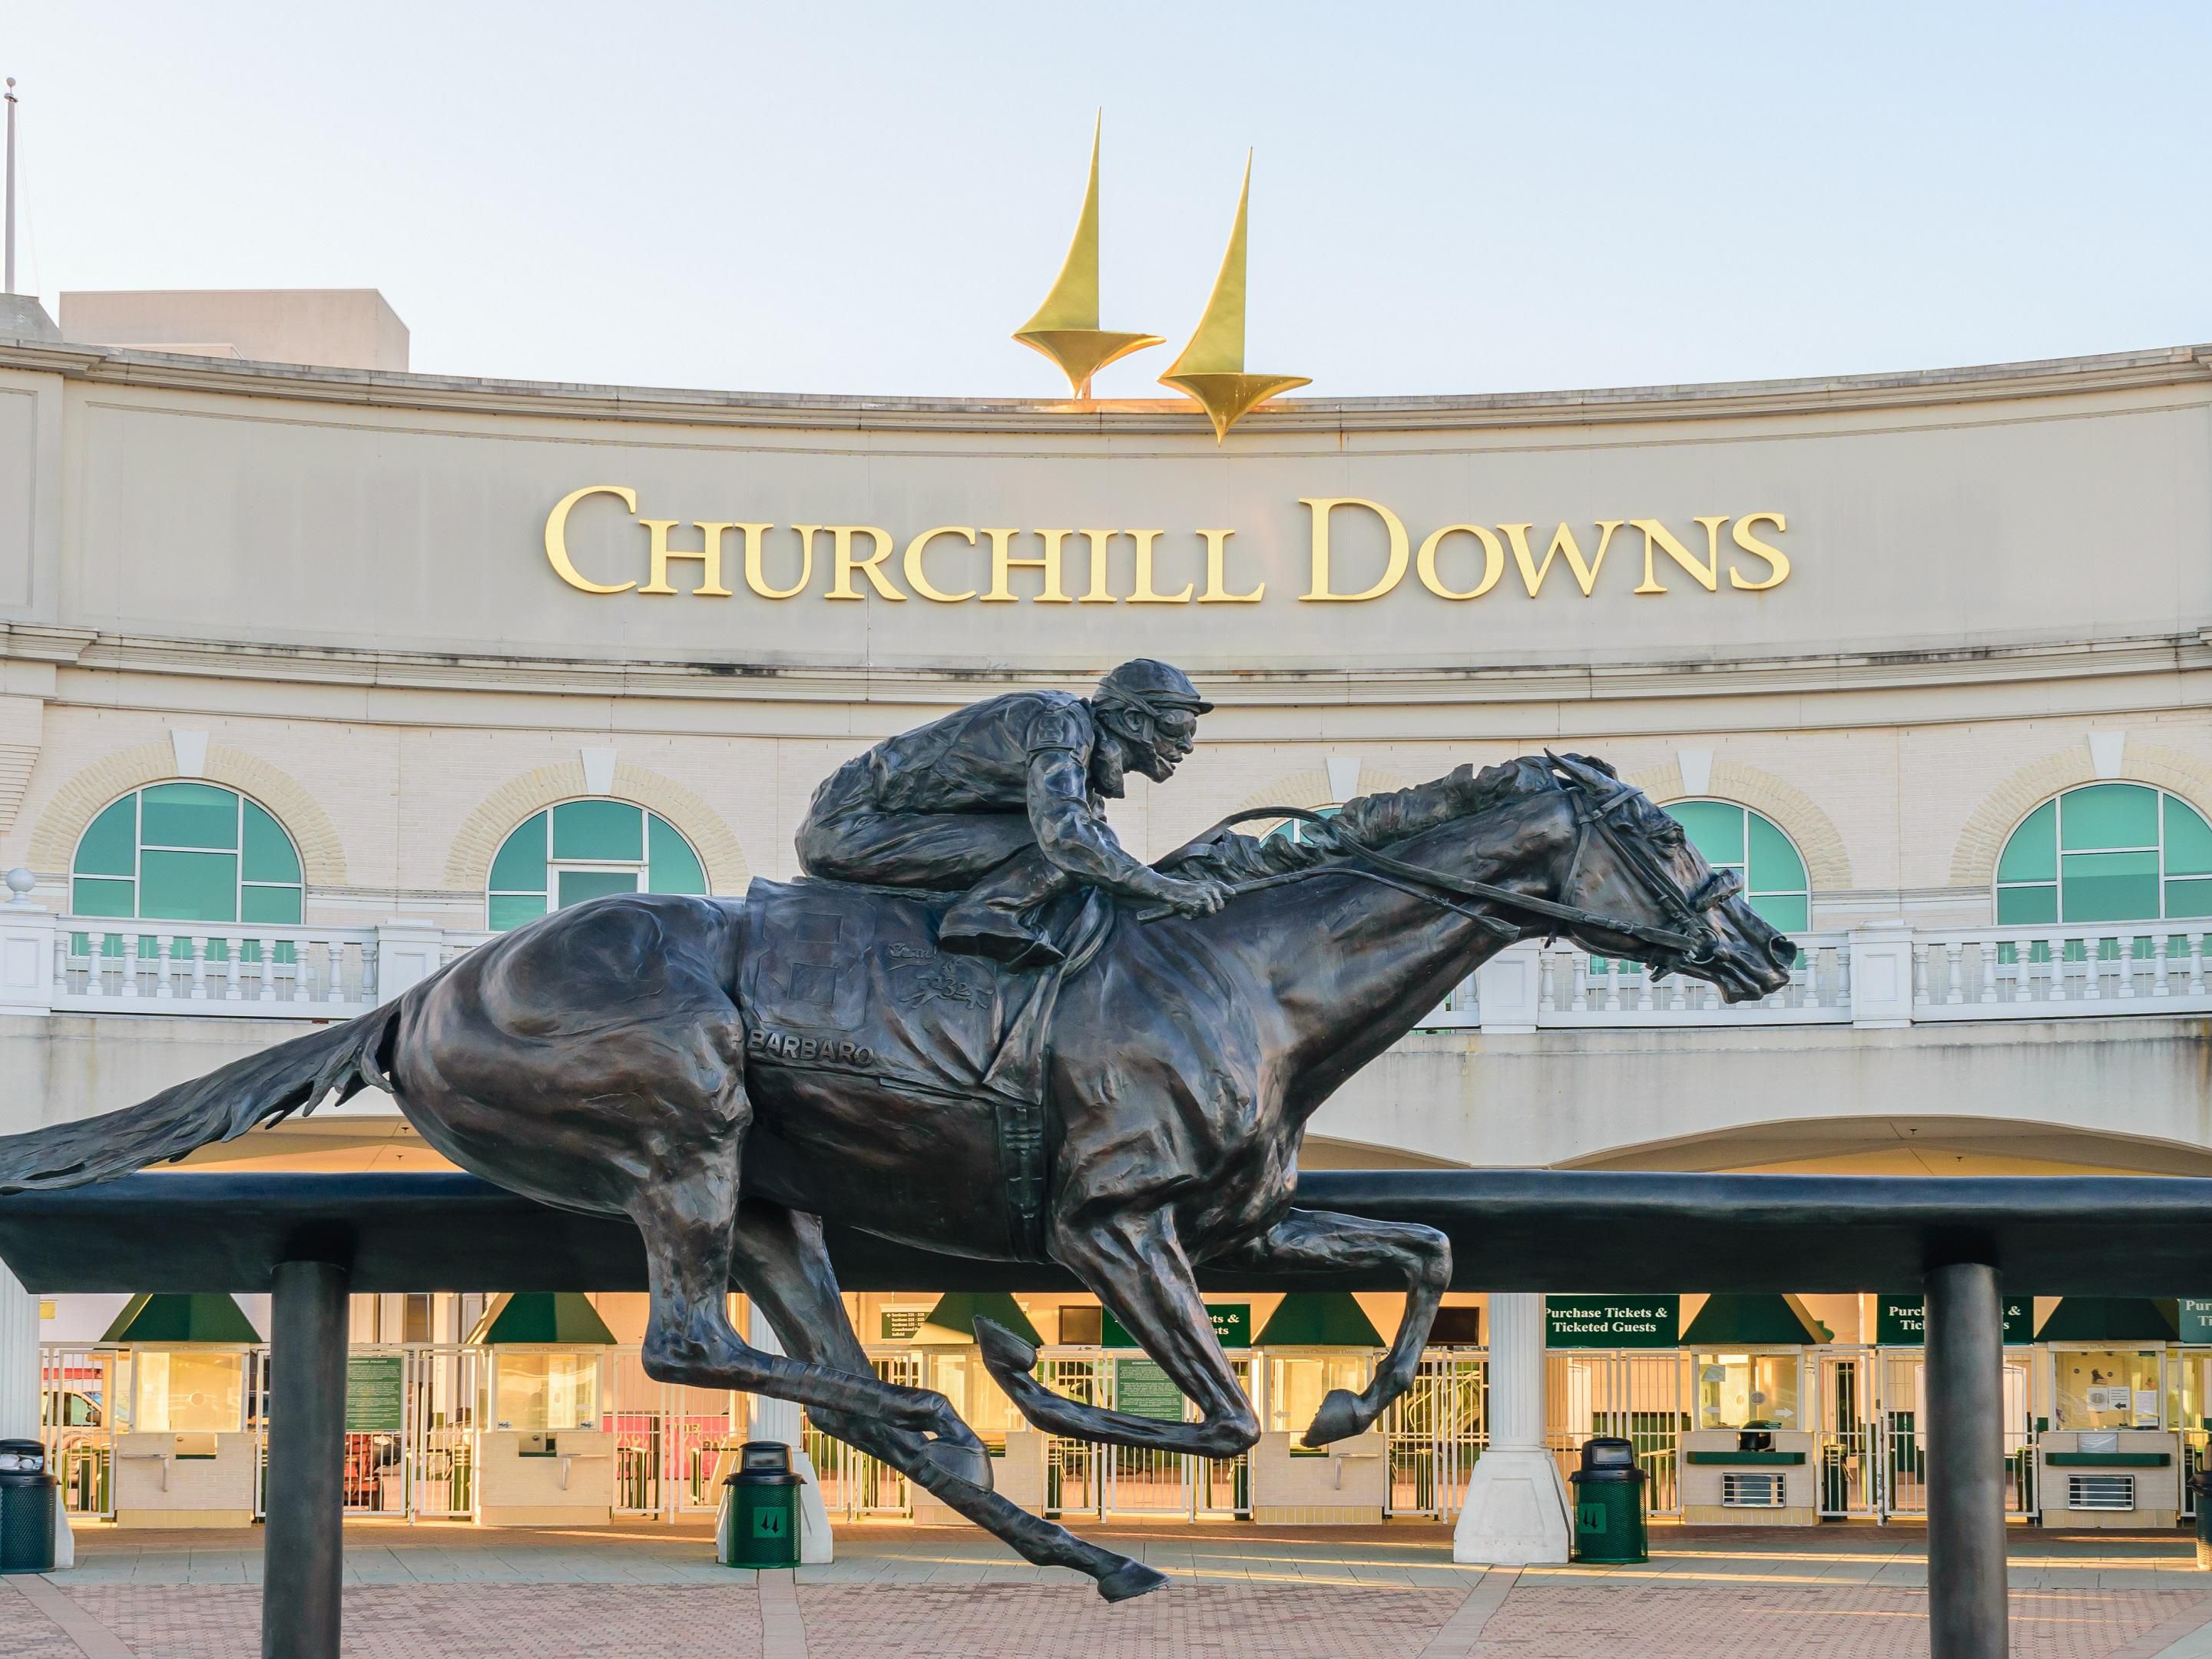 The Holiday Inn Louisville Airport Fair/Expo is the closest hotel to Churchill Downs. We are offering 3-Night Kentucky Derby Packages for May 4-6, 2023. Book your reservation now online or contact the sales department for more information. Don't miss the fastest two minutes in sports and book your Derby reservation today!